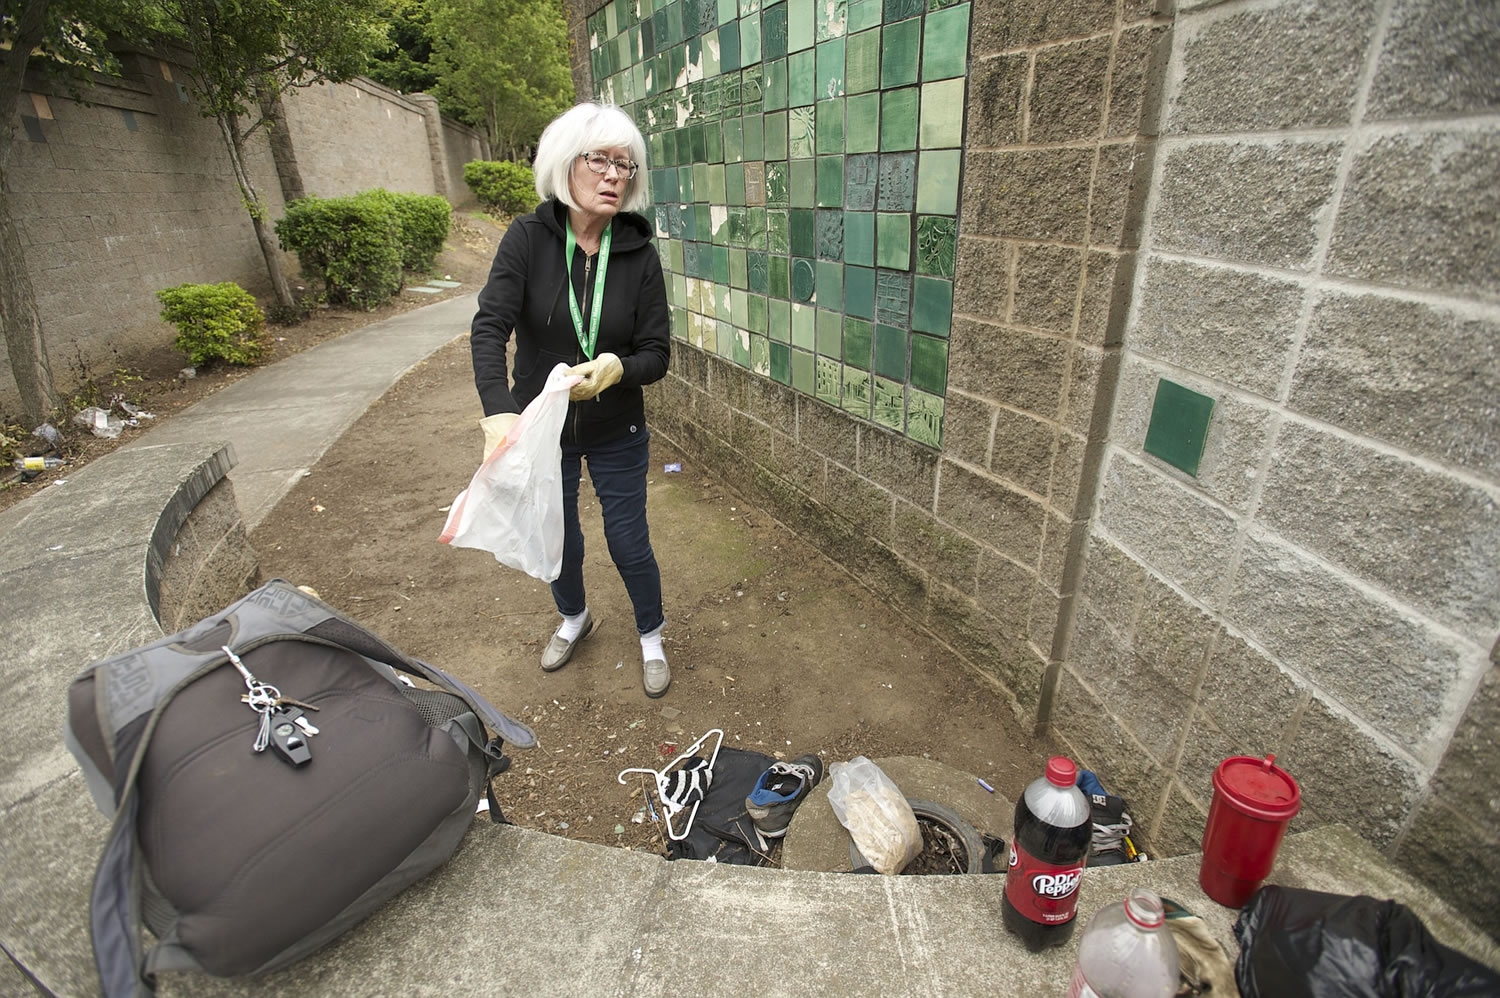 Photos by Steven Lane/The Columbian
Hough neighborhood resident Nancy Schultz, picking up trash in the Mill Plain Boulevard sound wall's alcoves in mid-May, would like to ensure the 2001 community tile art project on the walls are preserved if the alcoves are blocked off or torn down.